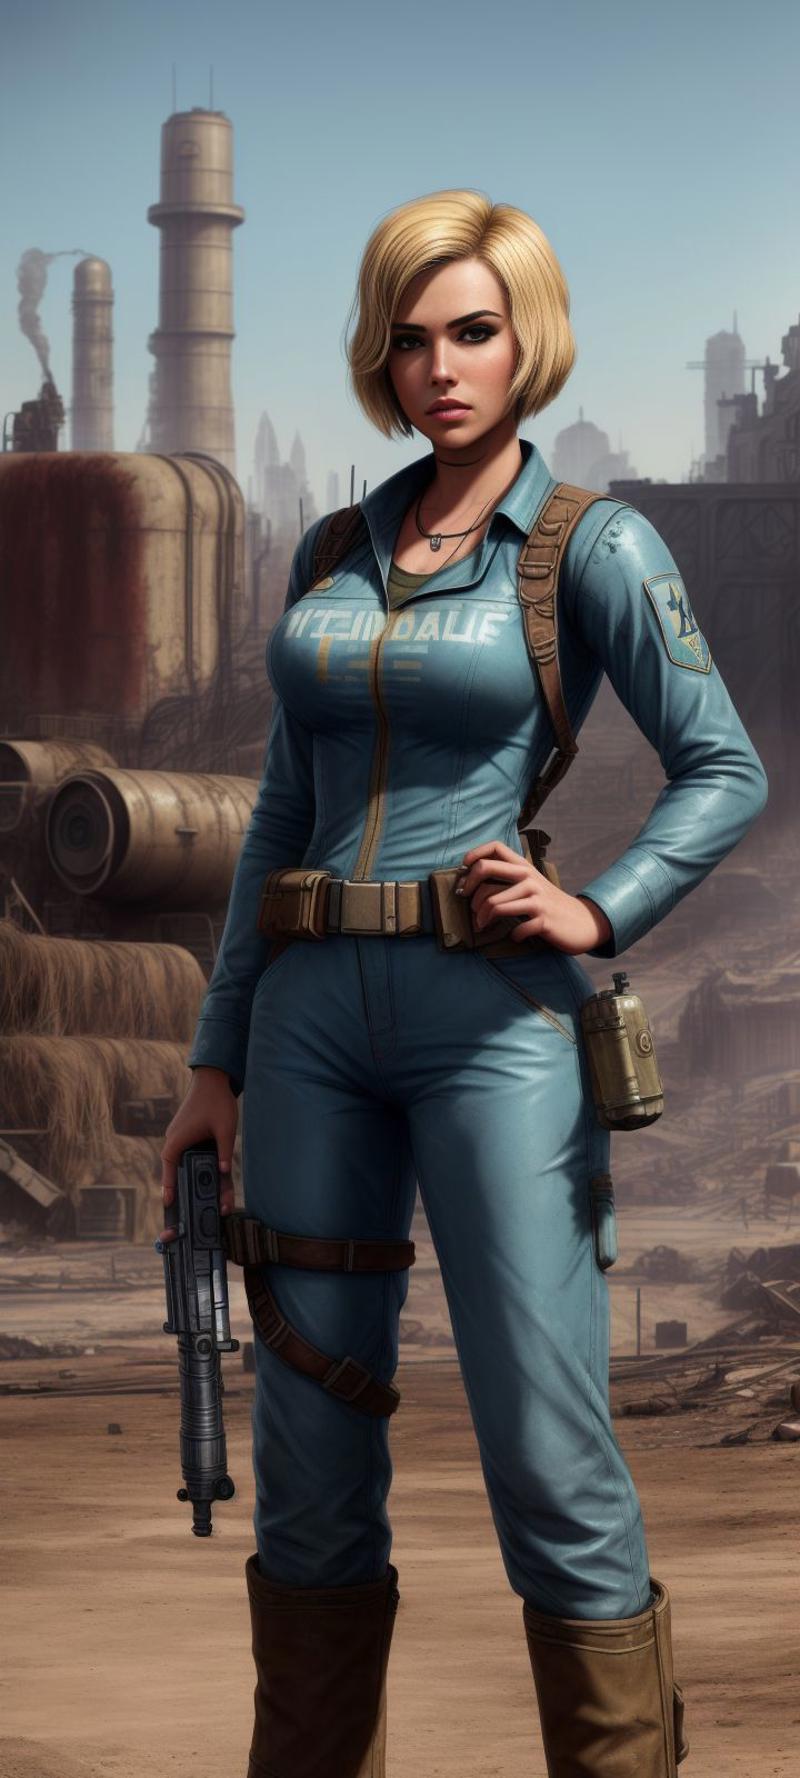 Vault Girl/Boy and Jumpsuit (fallout) image by Nathill